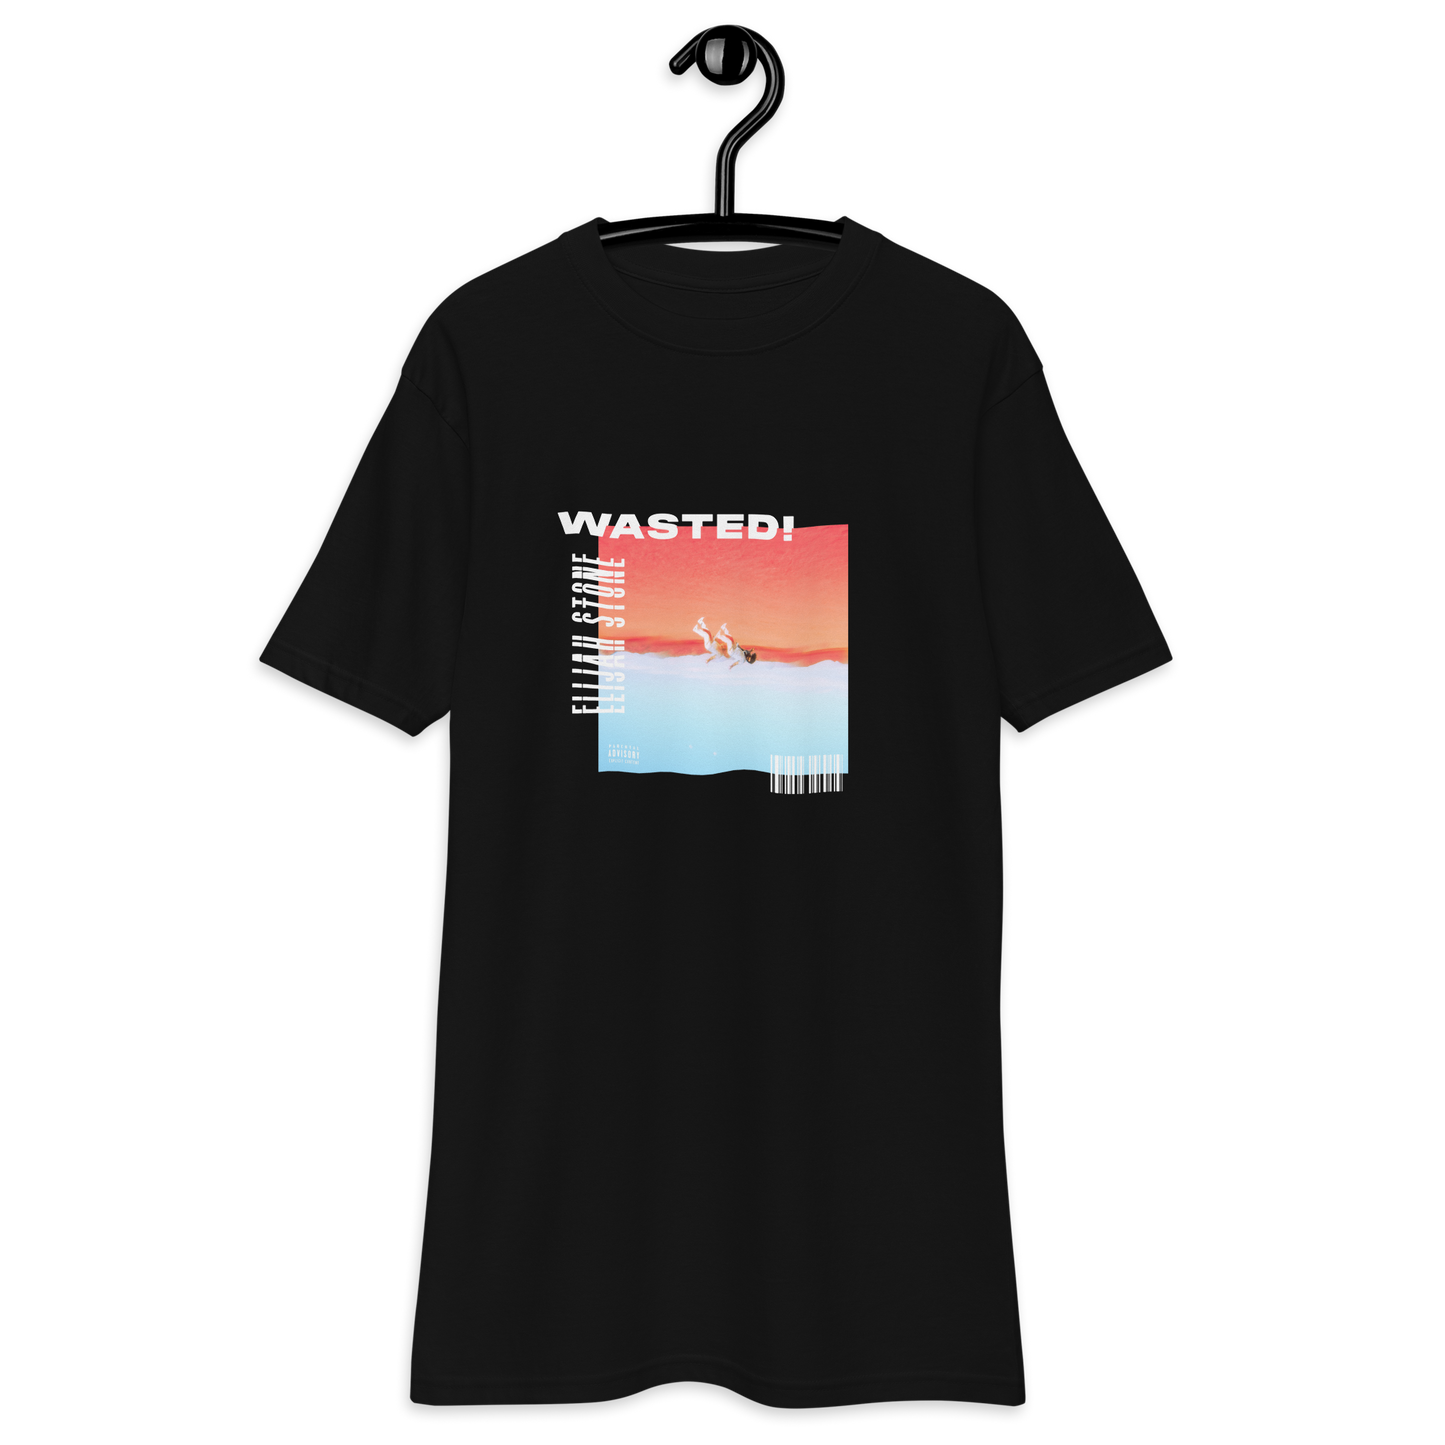 WASTED! T-Shirt